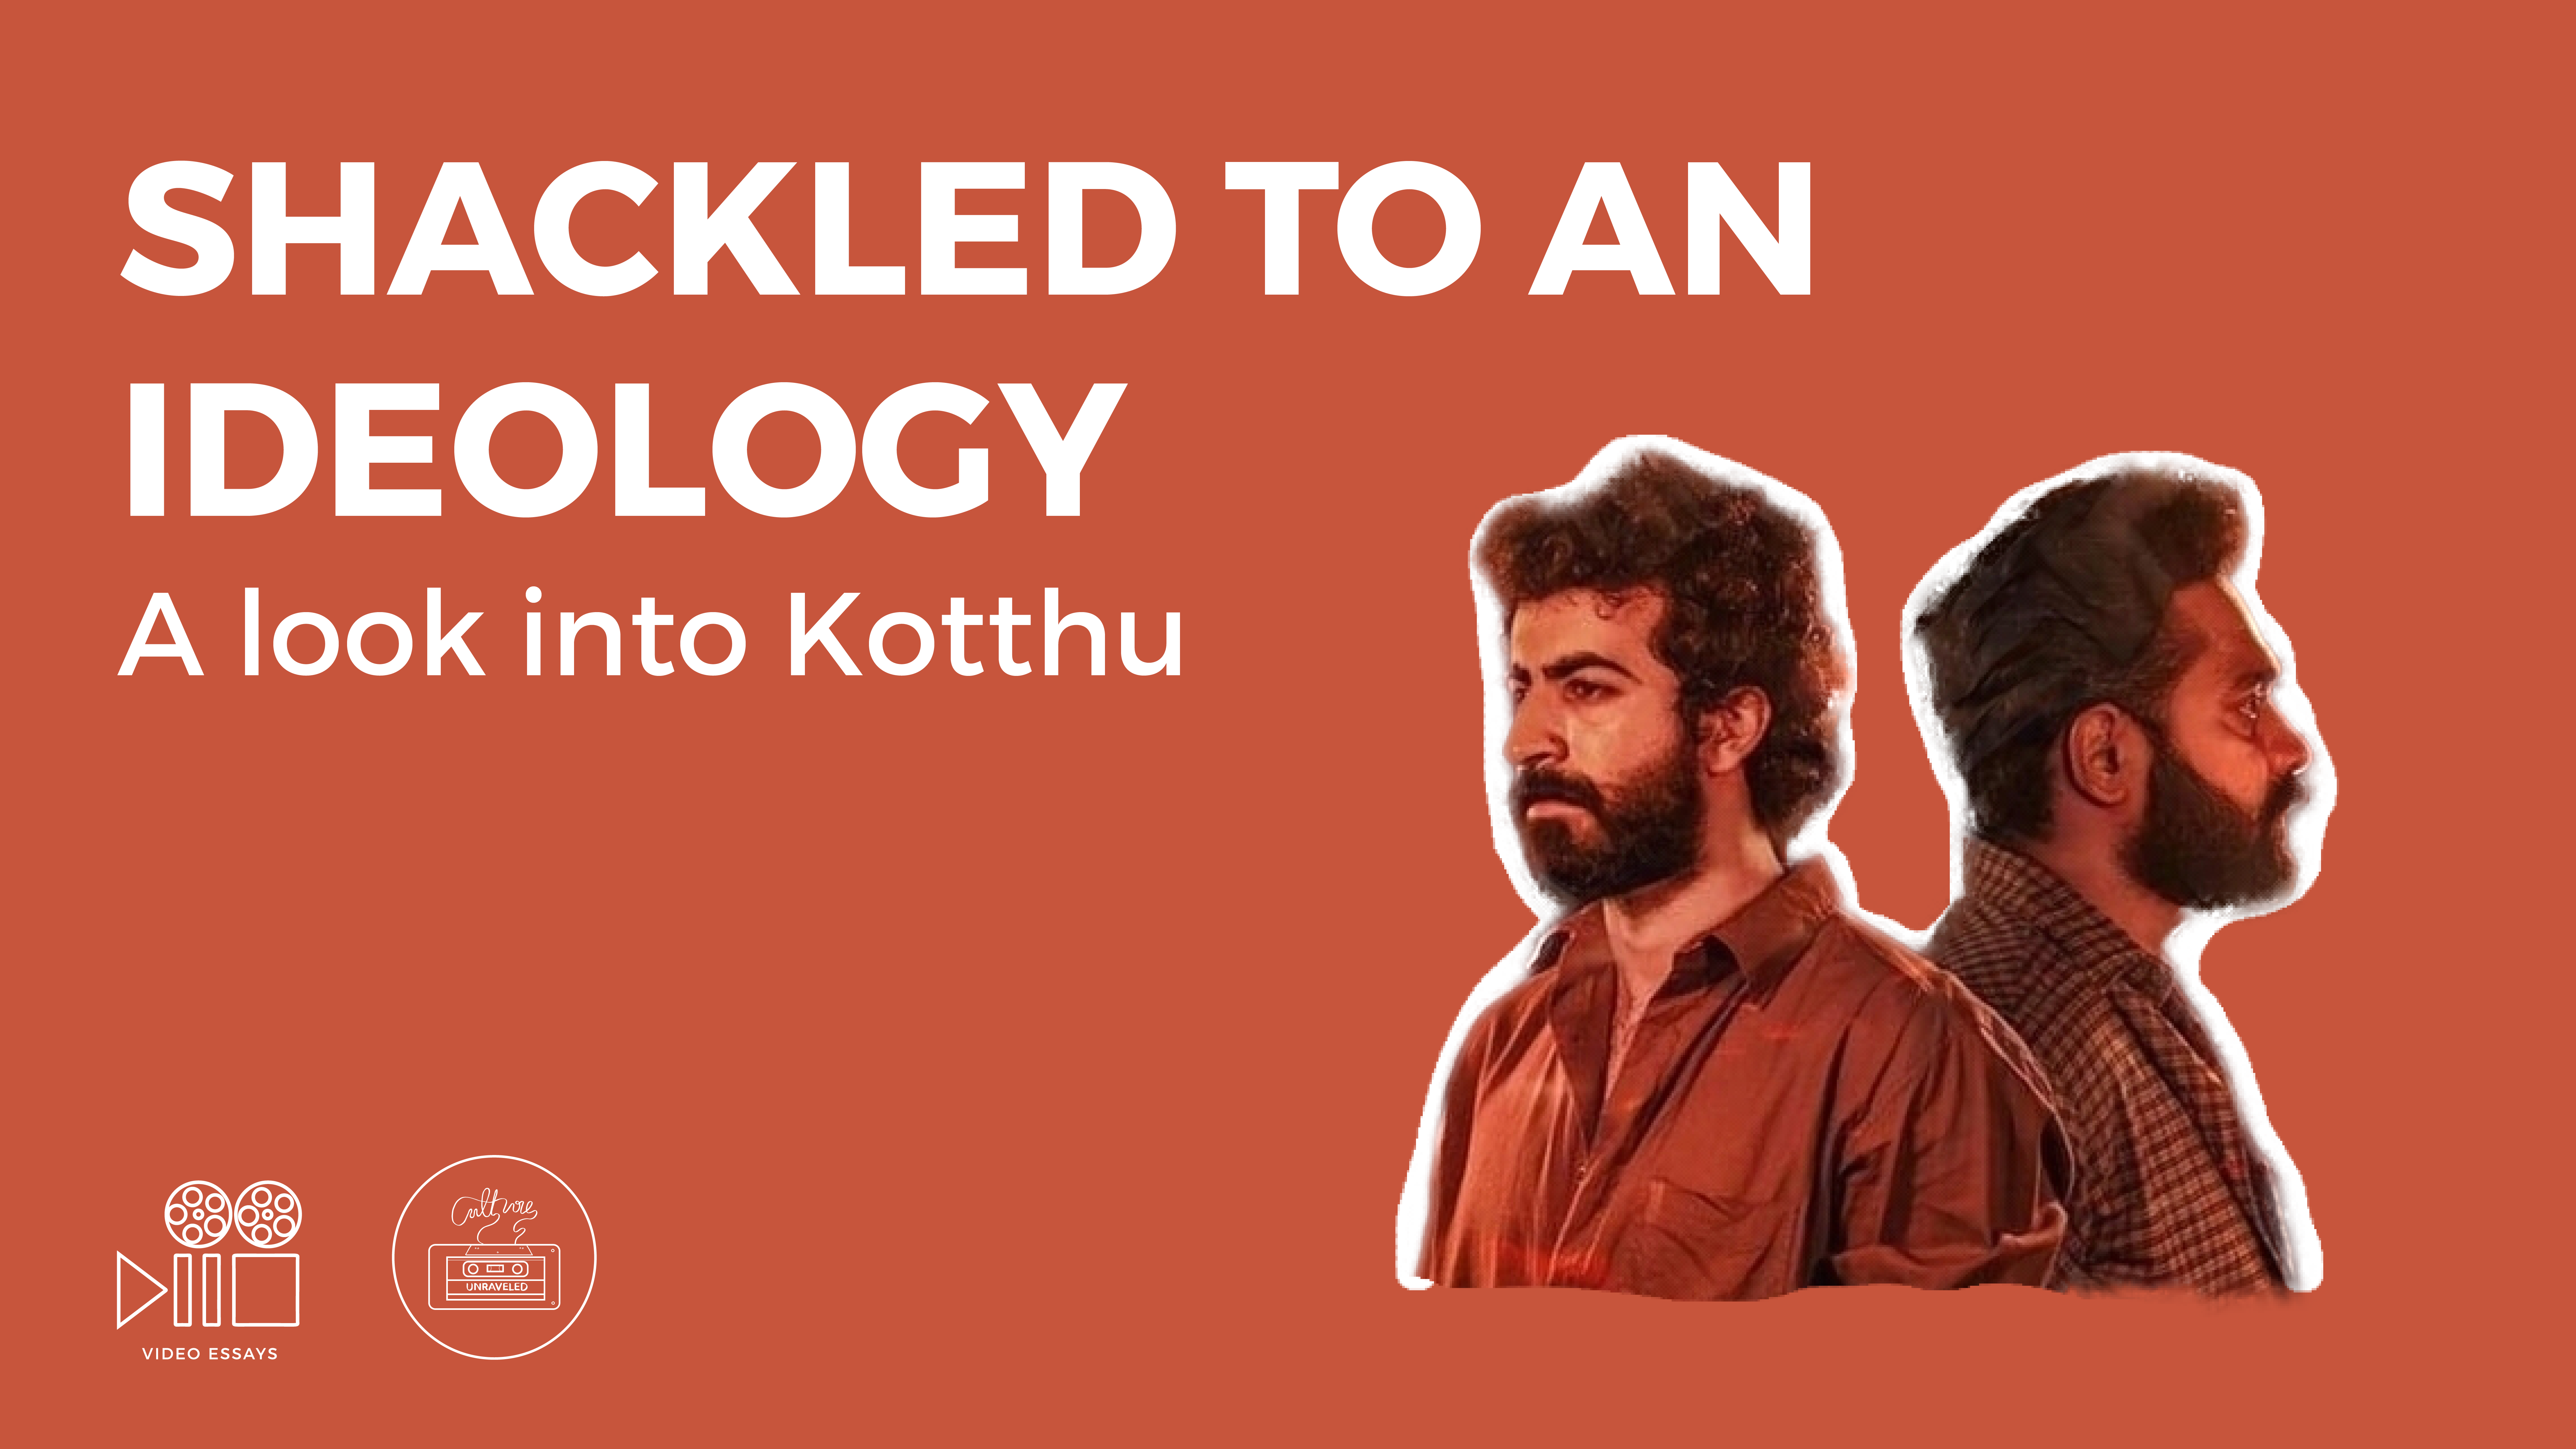 Shackled to an Ideology: A Look into Kotthu